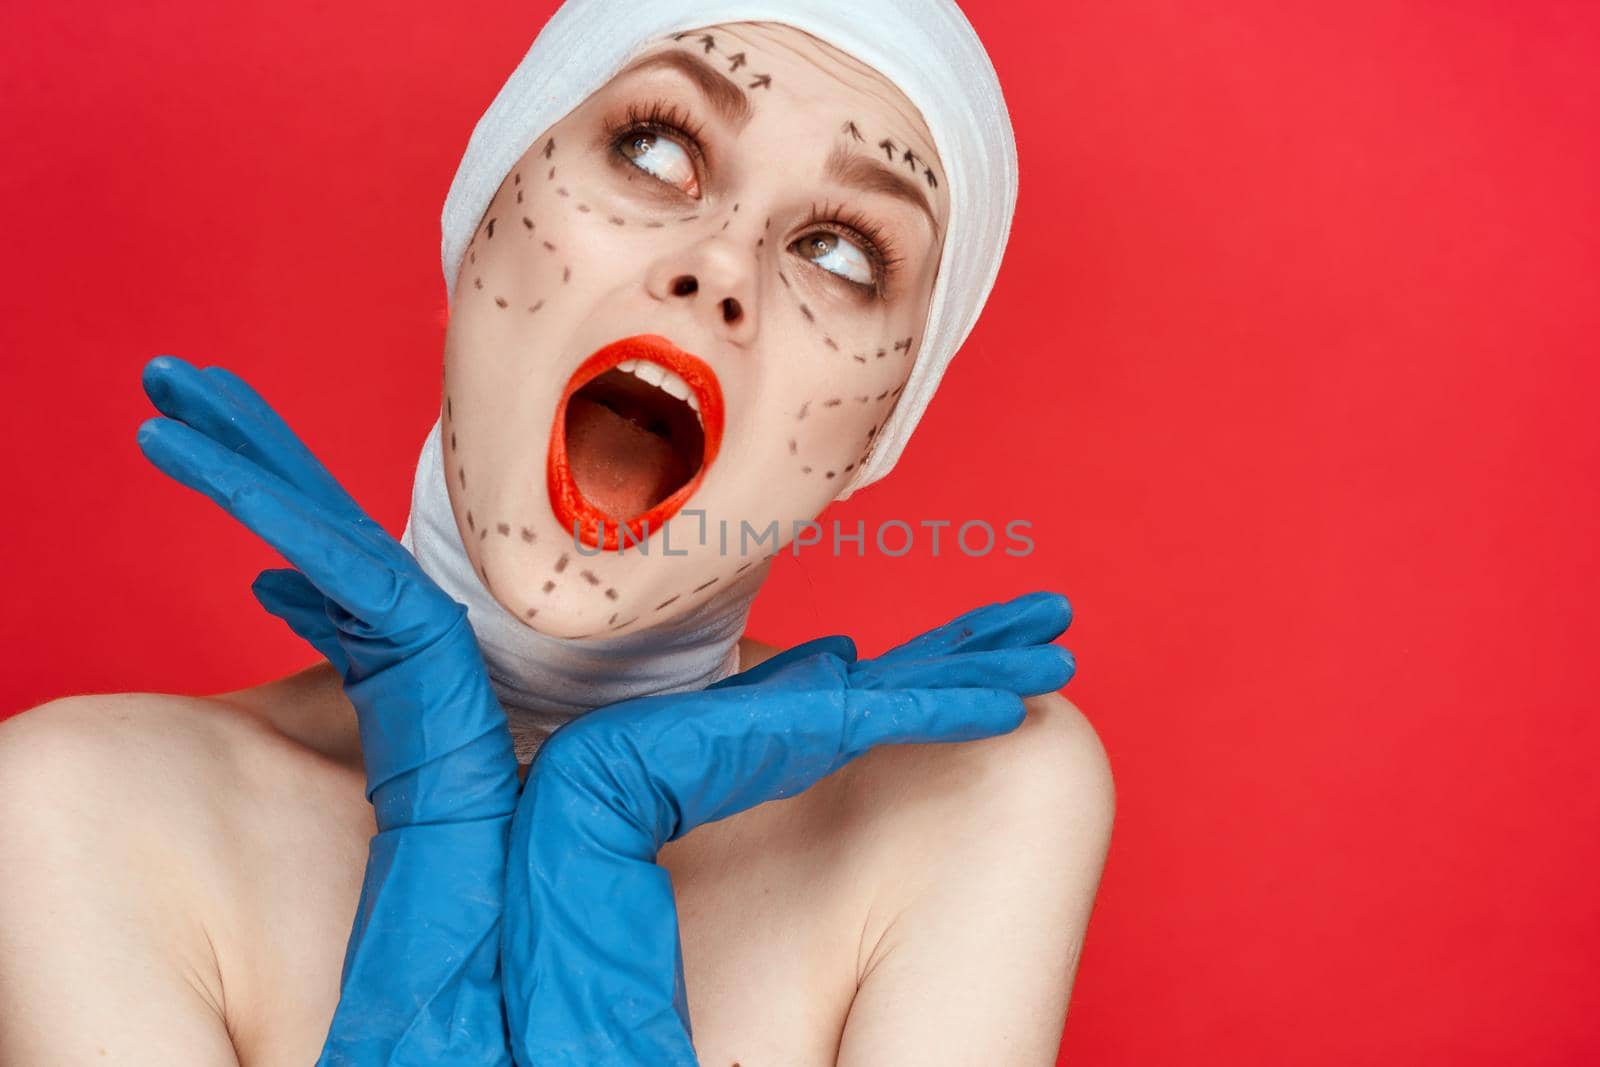 woman posing in blue gloves red lips surgery facial rejuvenation red background. High quality photo